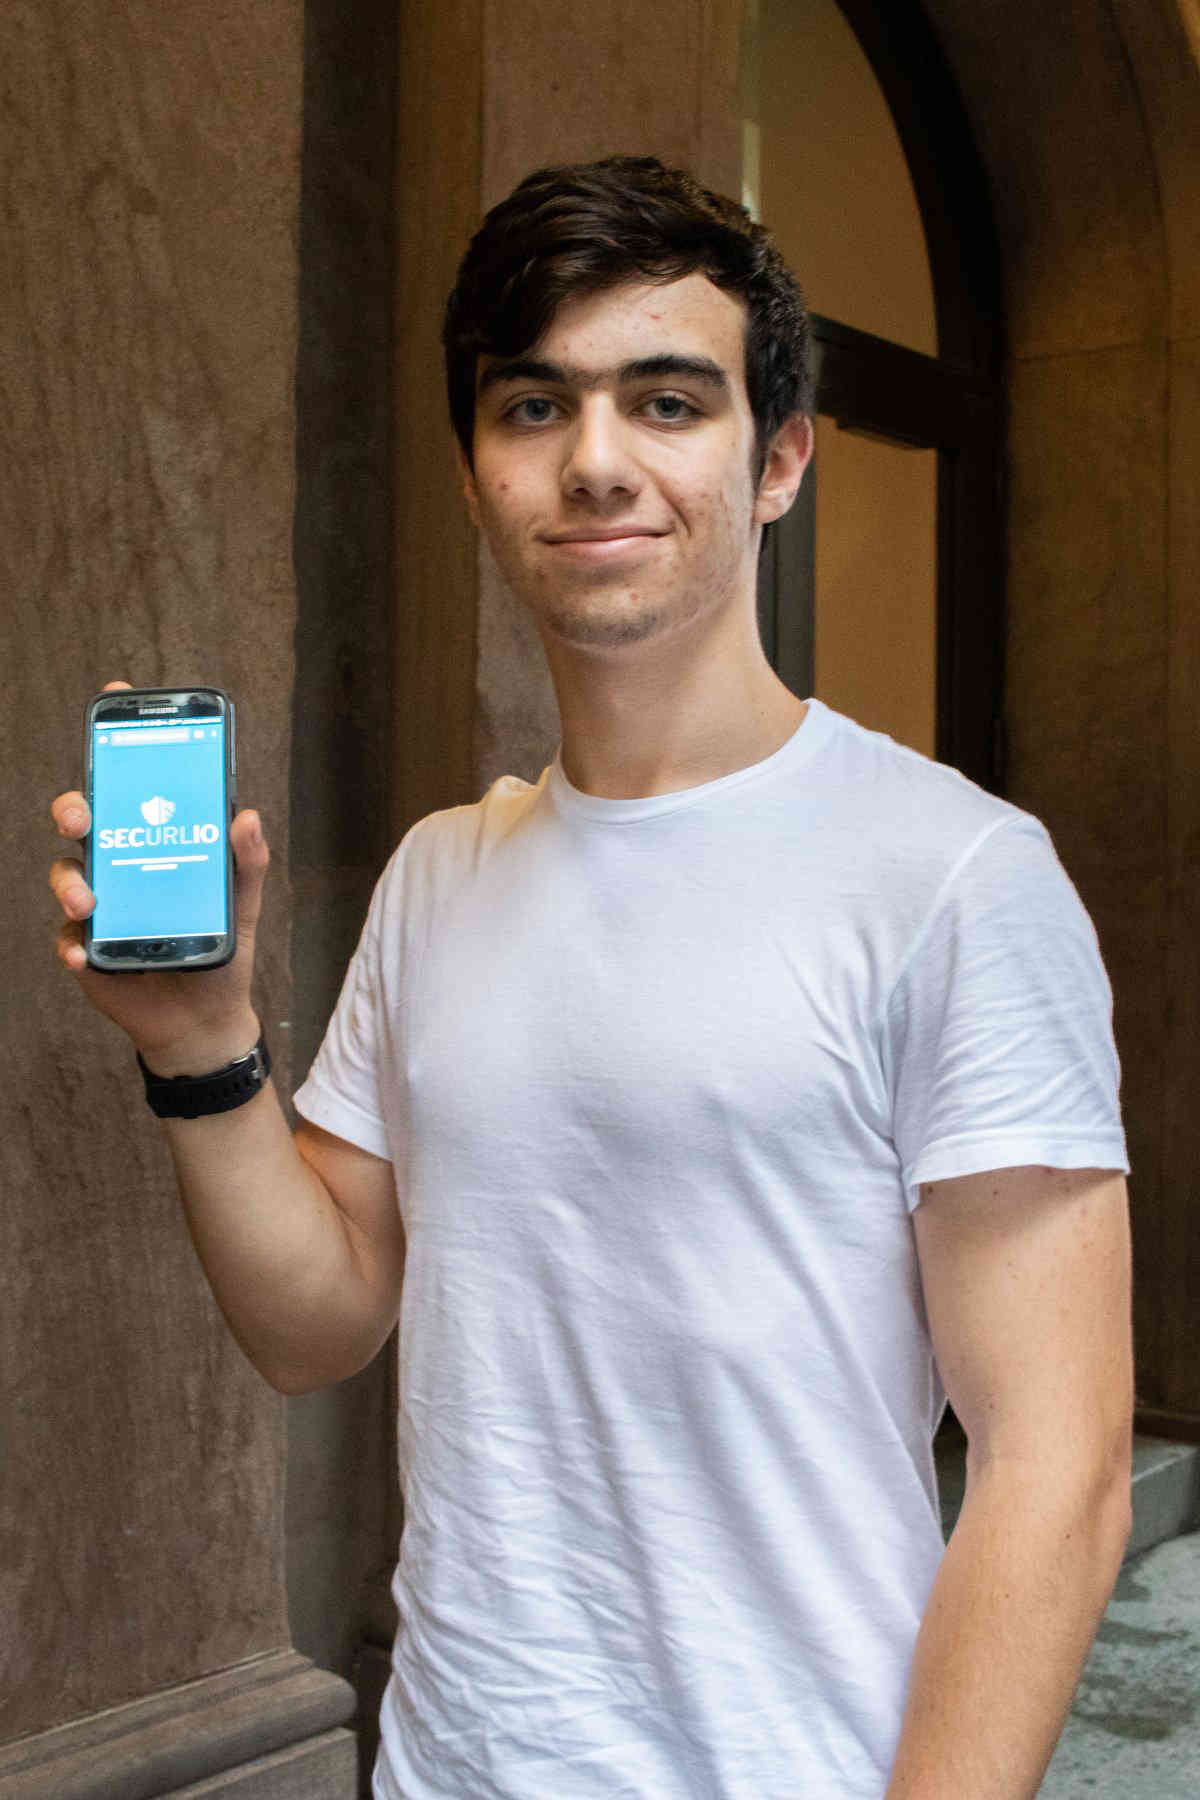 Cracking code: Manhattan Beach student wins global contest with password-protector invention